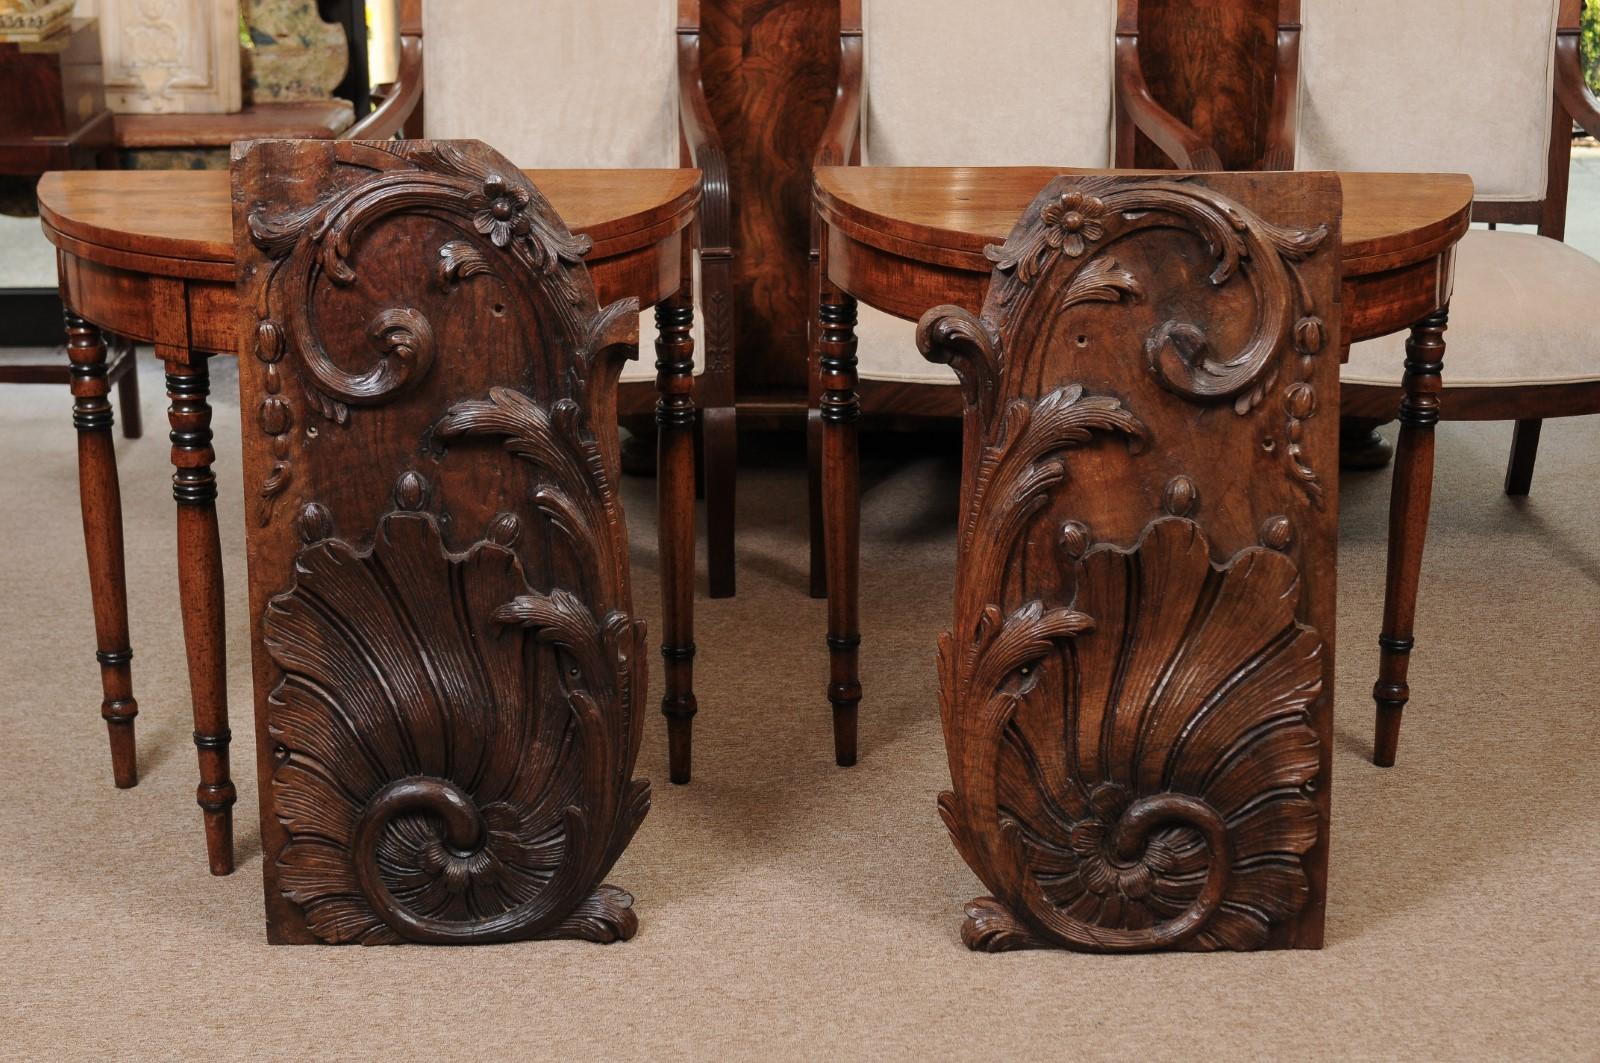 A pair of architectural elements with beautiful acanthus leaf and flower carving. The elements are constructed out of walnut with rich patina from the 18th century and quality detailed carving.